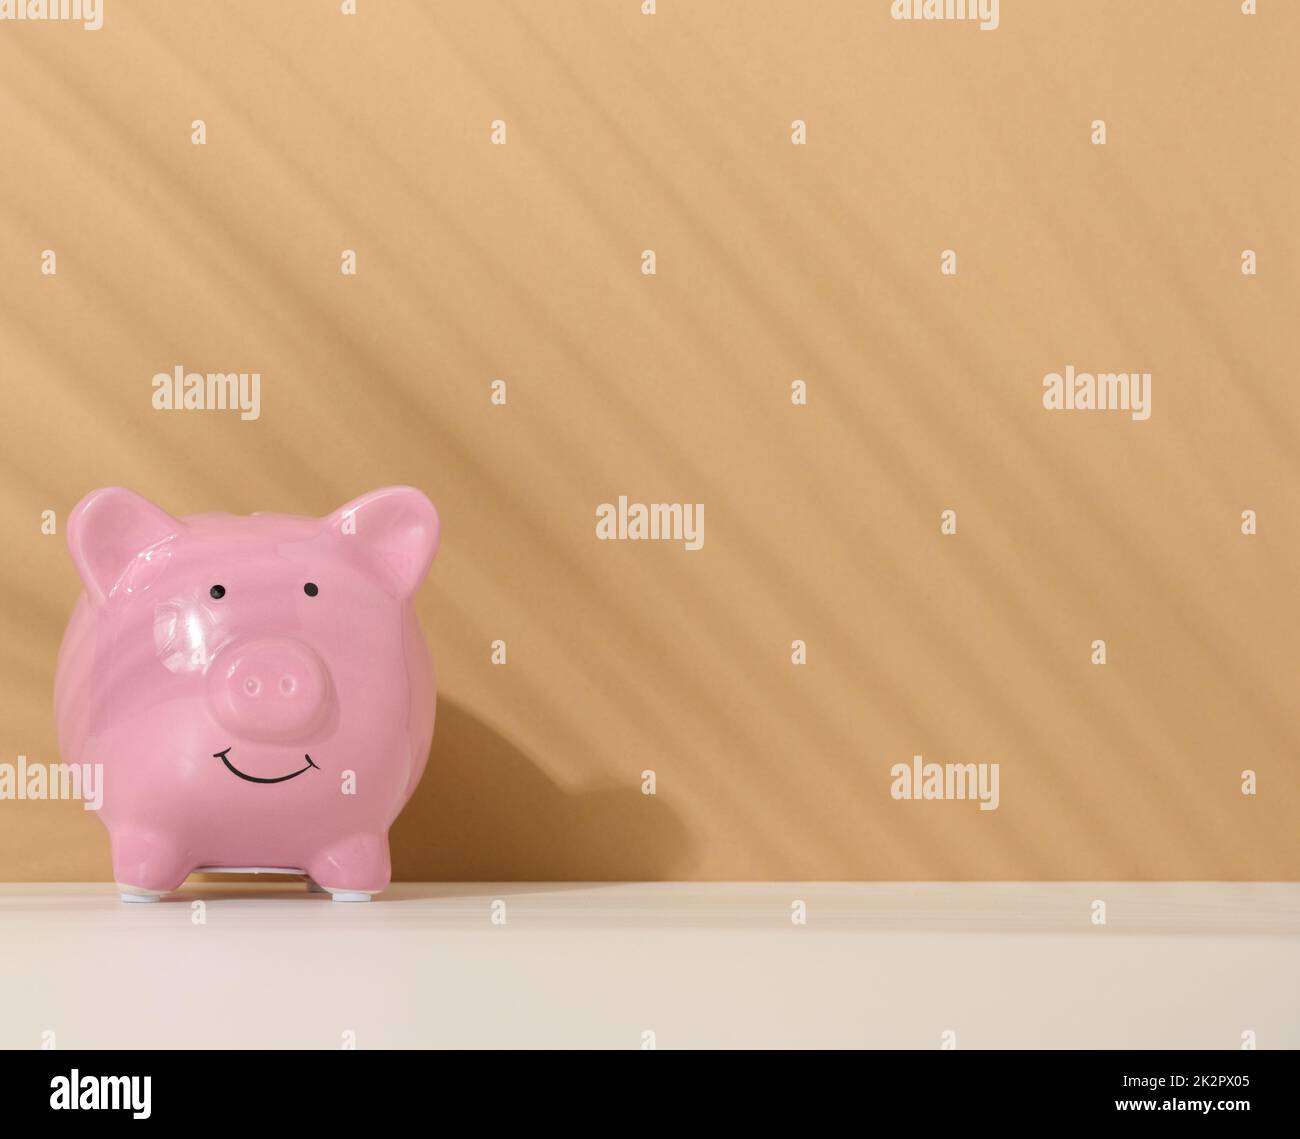 ceramic pink piggy bank on a brown background. Concept of increasing income from bank accounts, savings Stock Photo